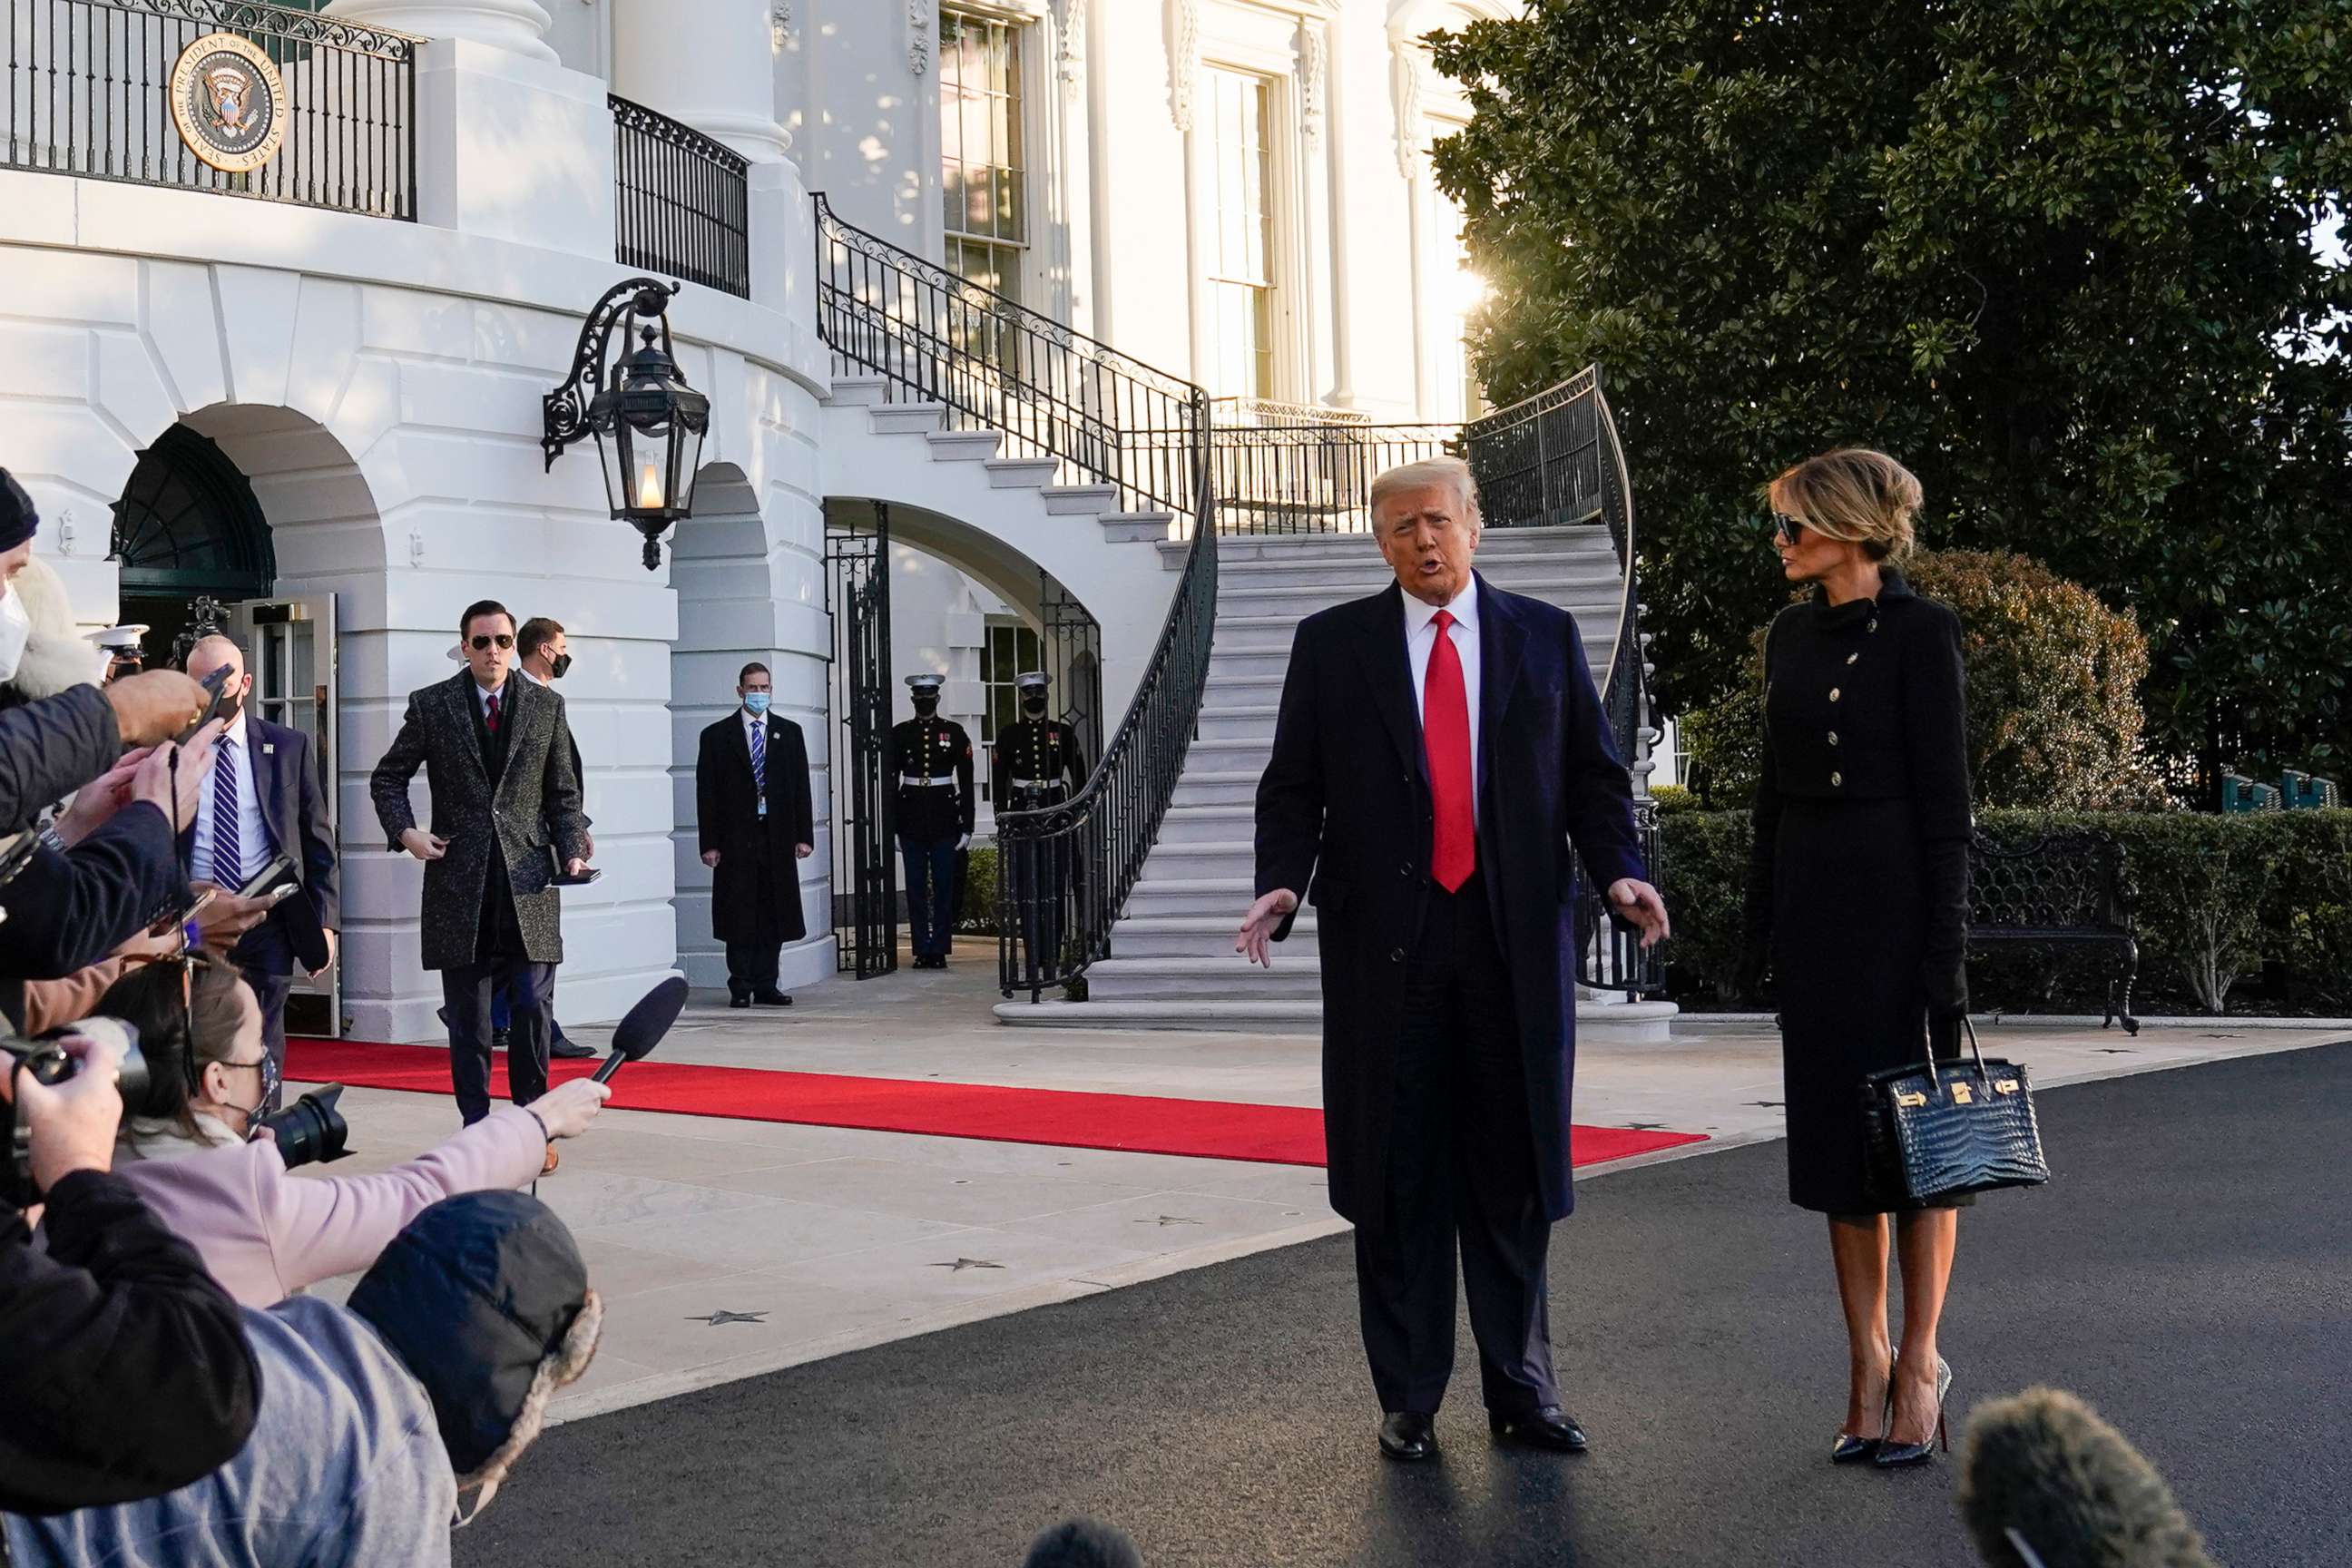 PHOTO: President Donald Trump and first lady Melania Trump stop to talk with the media as they walk to board Marine One on the South Lawn of the White House, Jan. 20, 2021, in Washington, D.C.